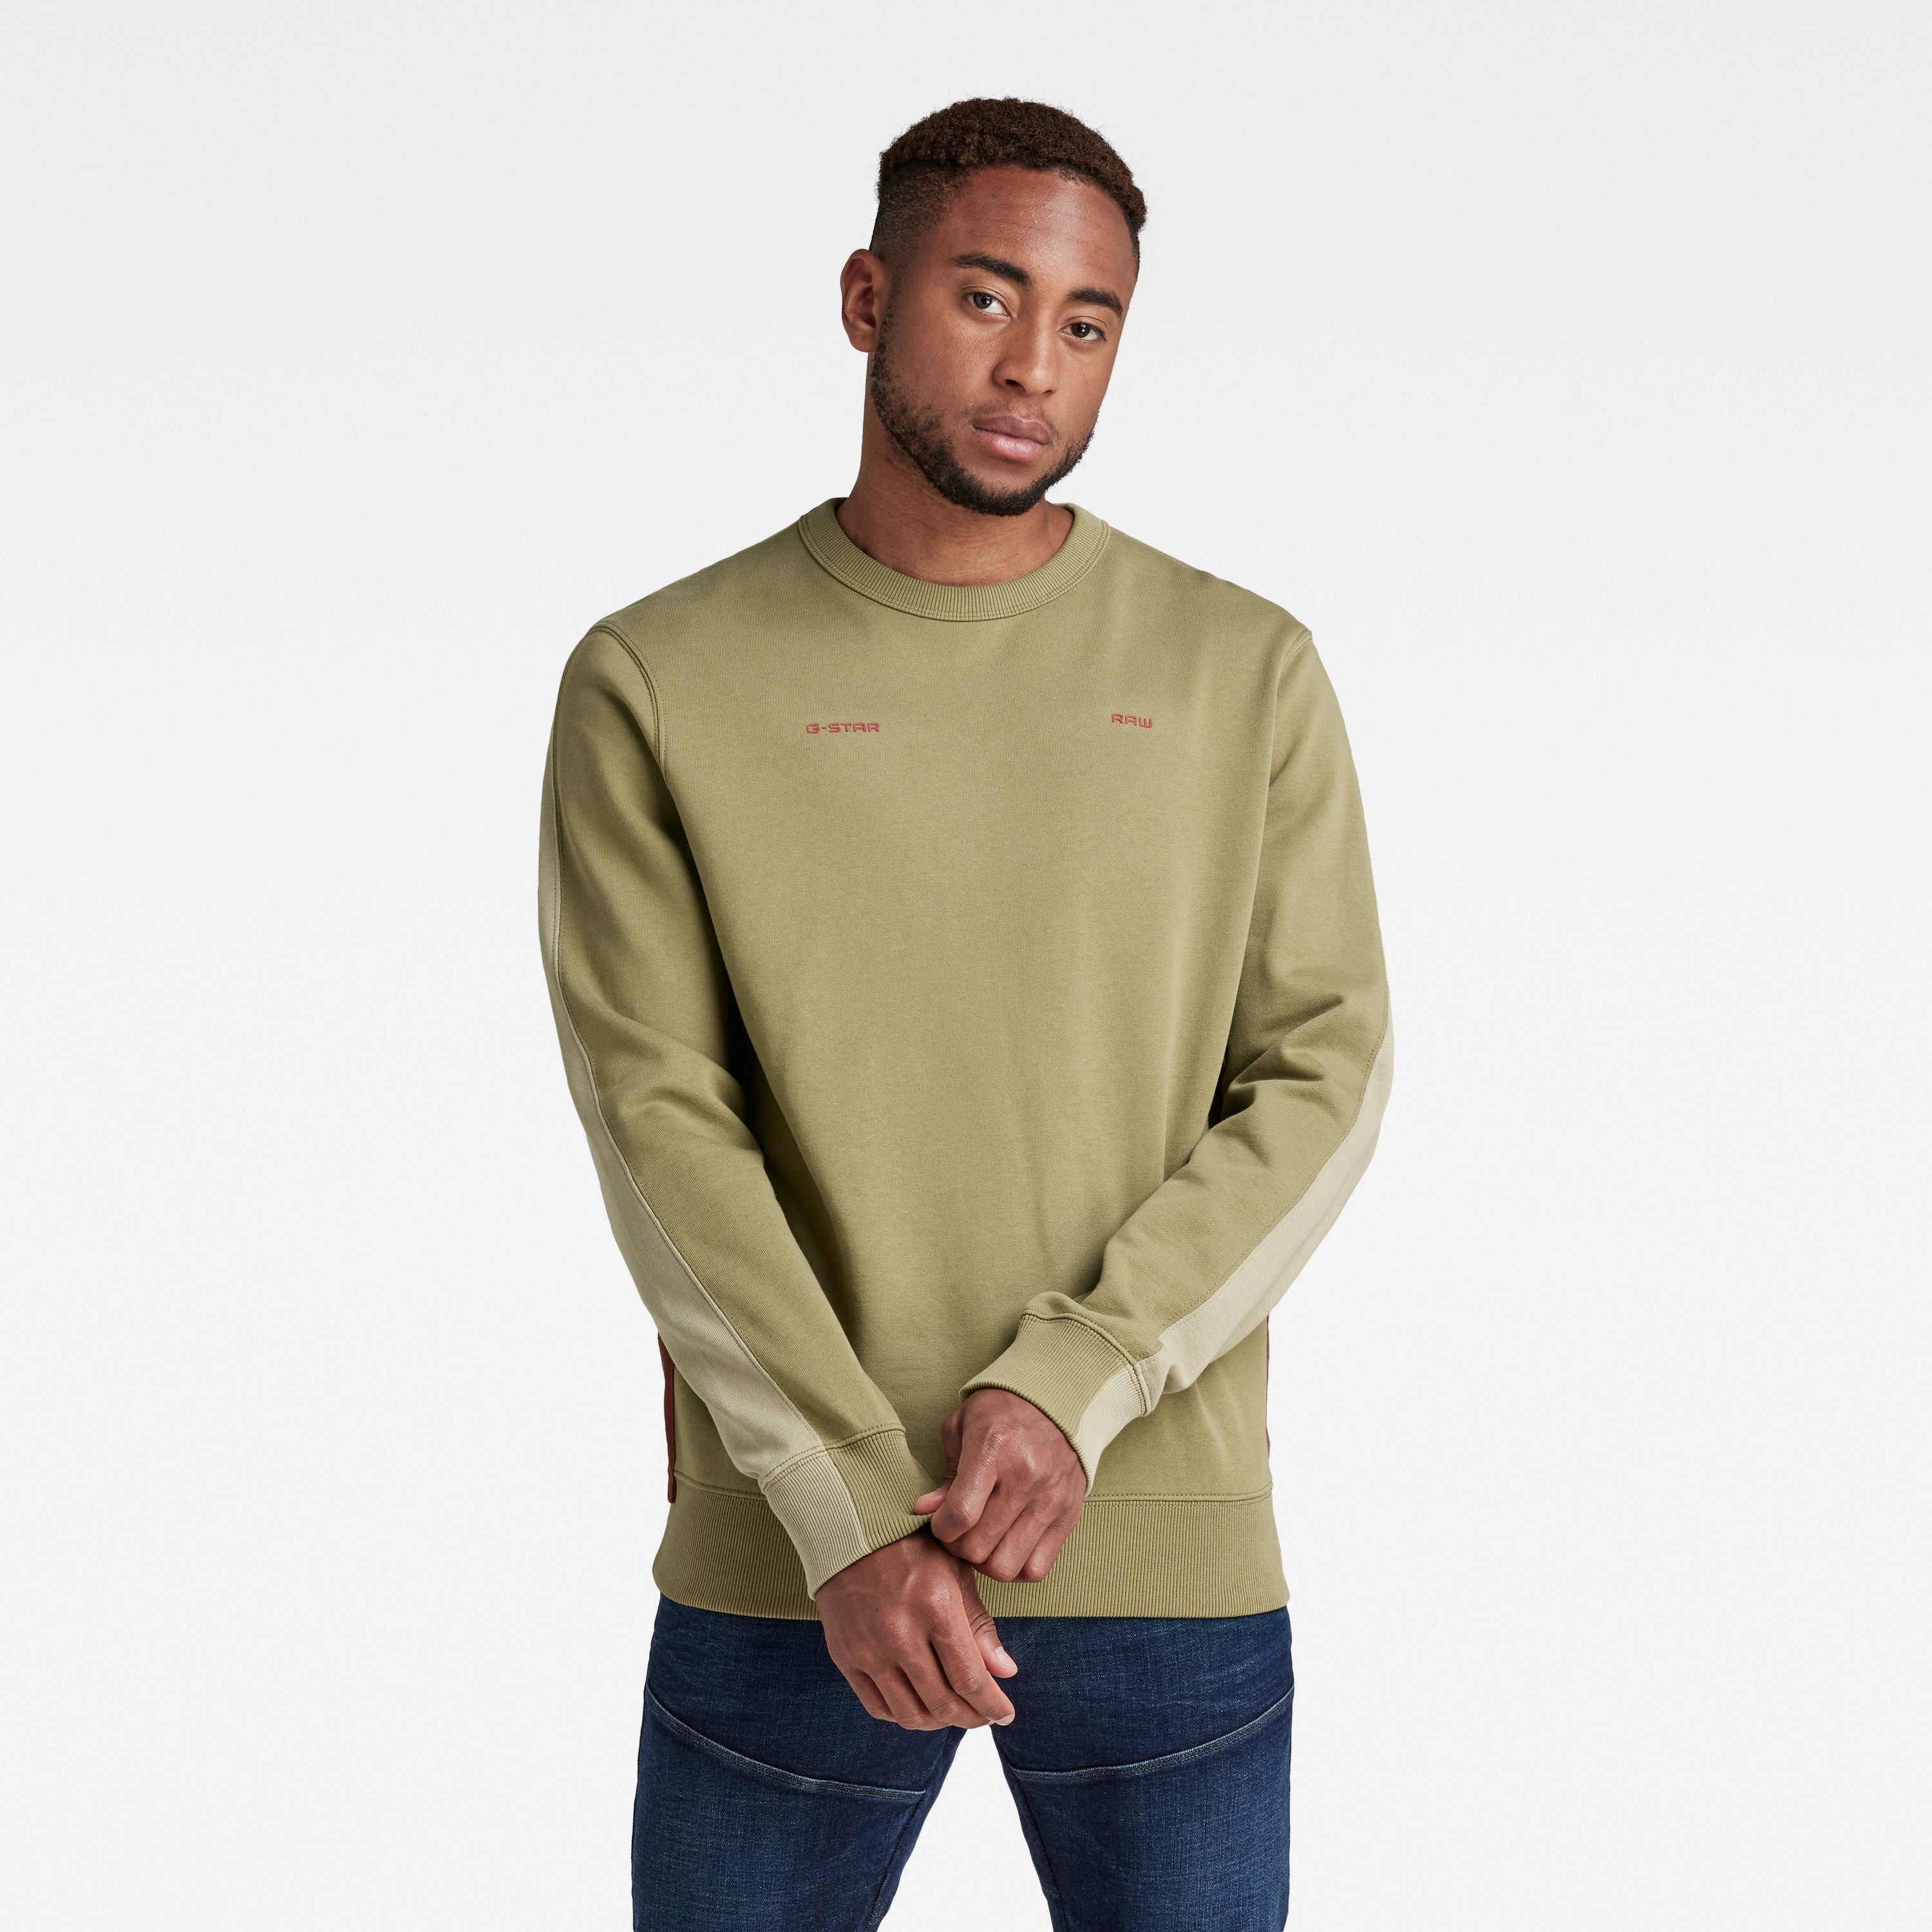 auditorium Overbevisende Modtager Buy G Star Raw Fresh Army Green Tape Color Block Sweatshirt at In Style –  InStyle-Tuscaloosa